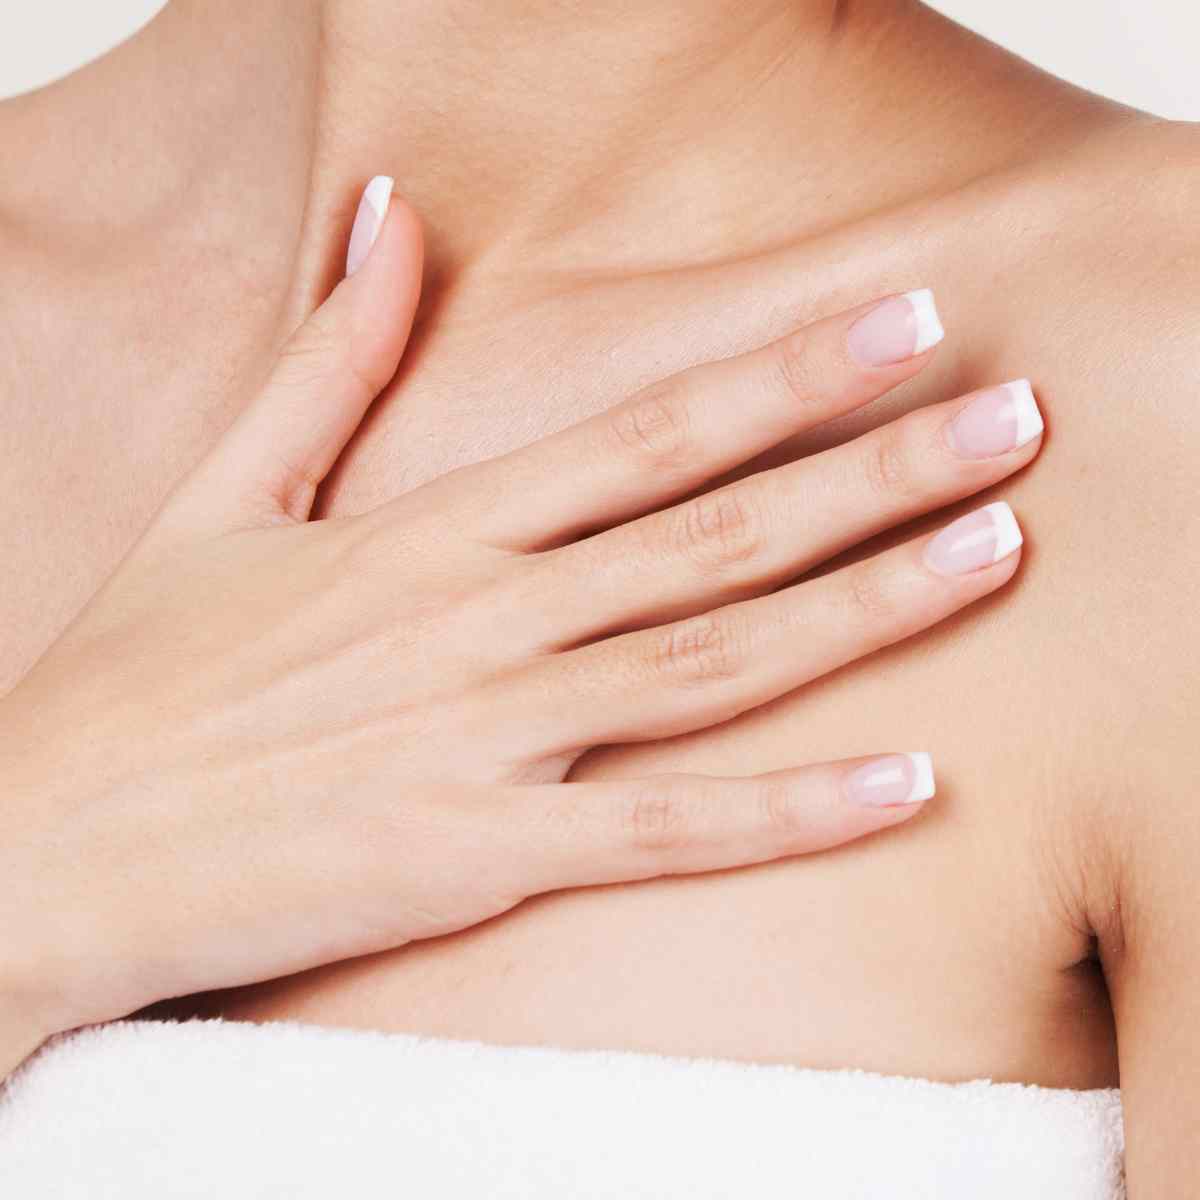 woman's hand on her décolletage area.